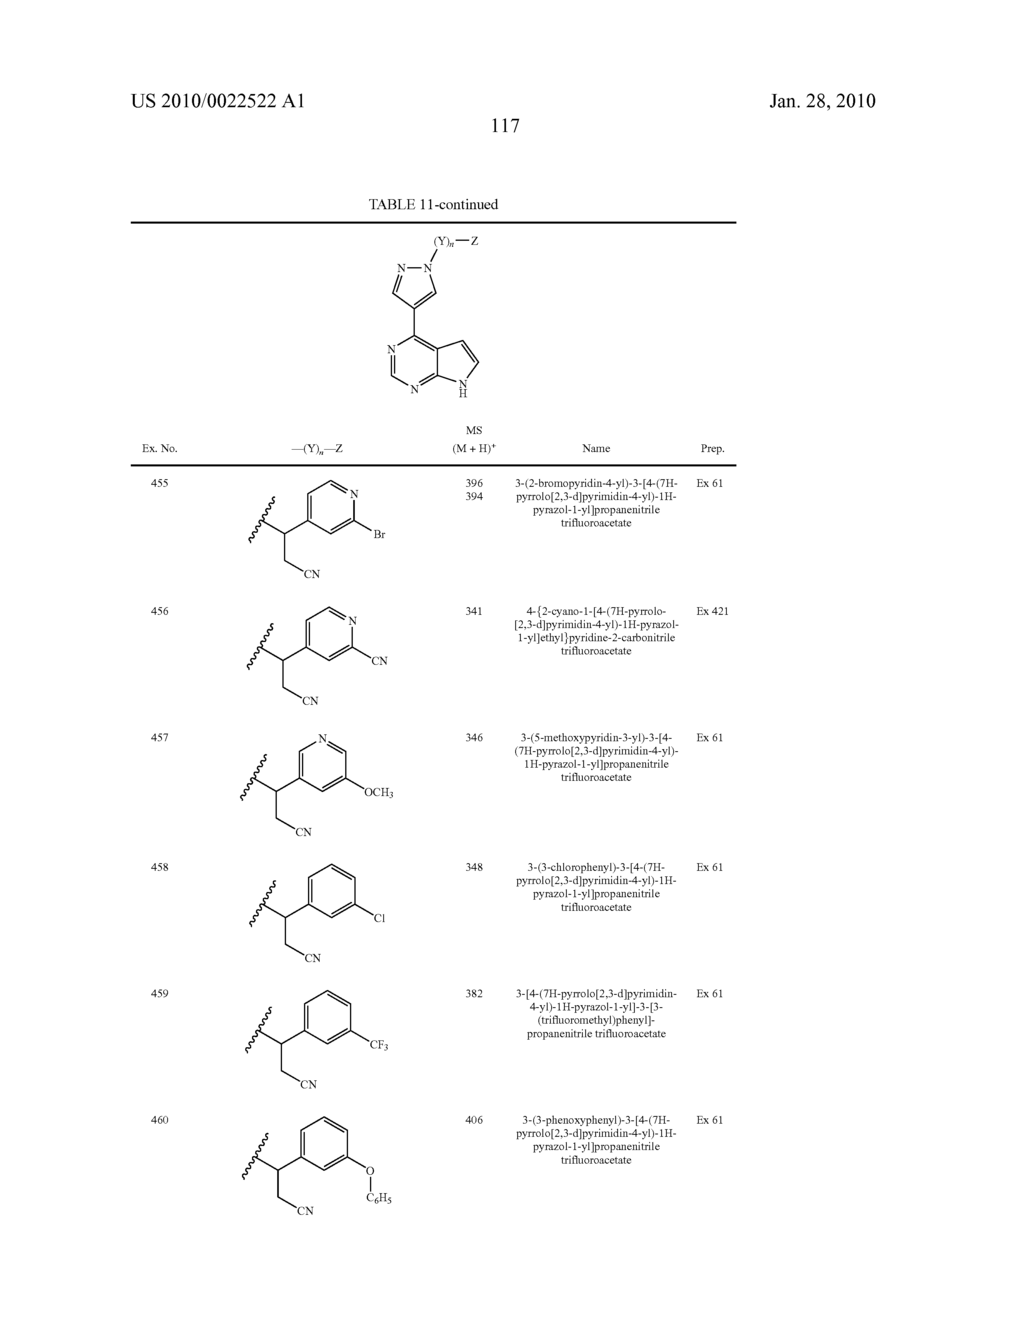 HETEROARYL SUBSTITUTED PYRROLO[2,3-b]PYRIDINES AND PYRROLO[2,3-b]PYRIMIDINES AS JANUS KINASE INHIBITORS - diagram, schematic, and image 118